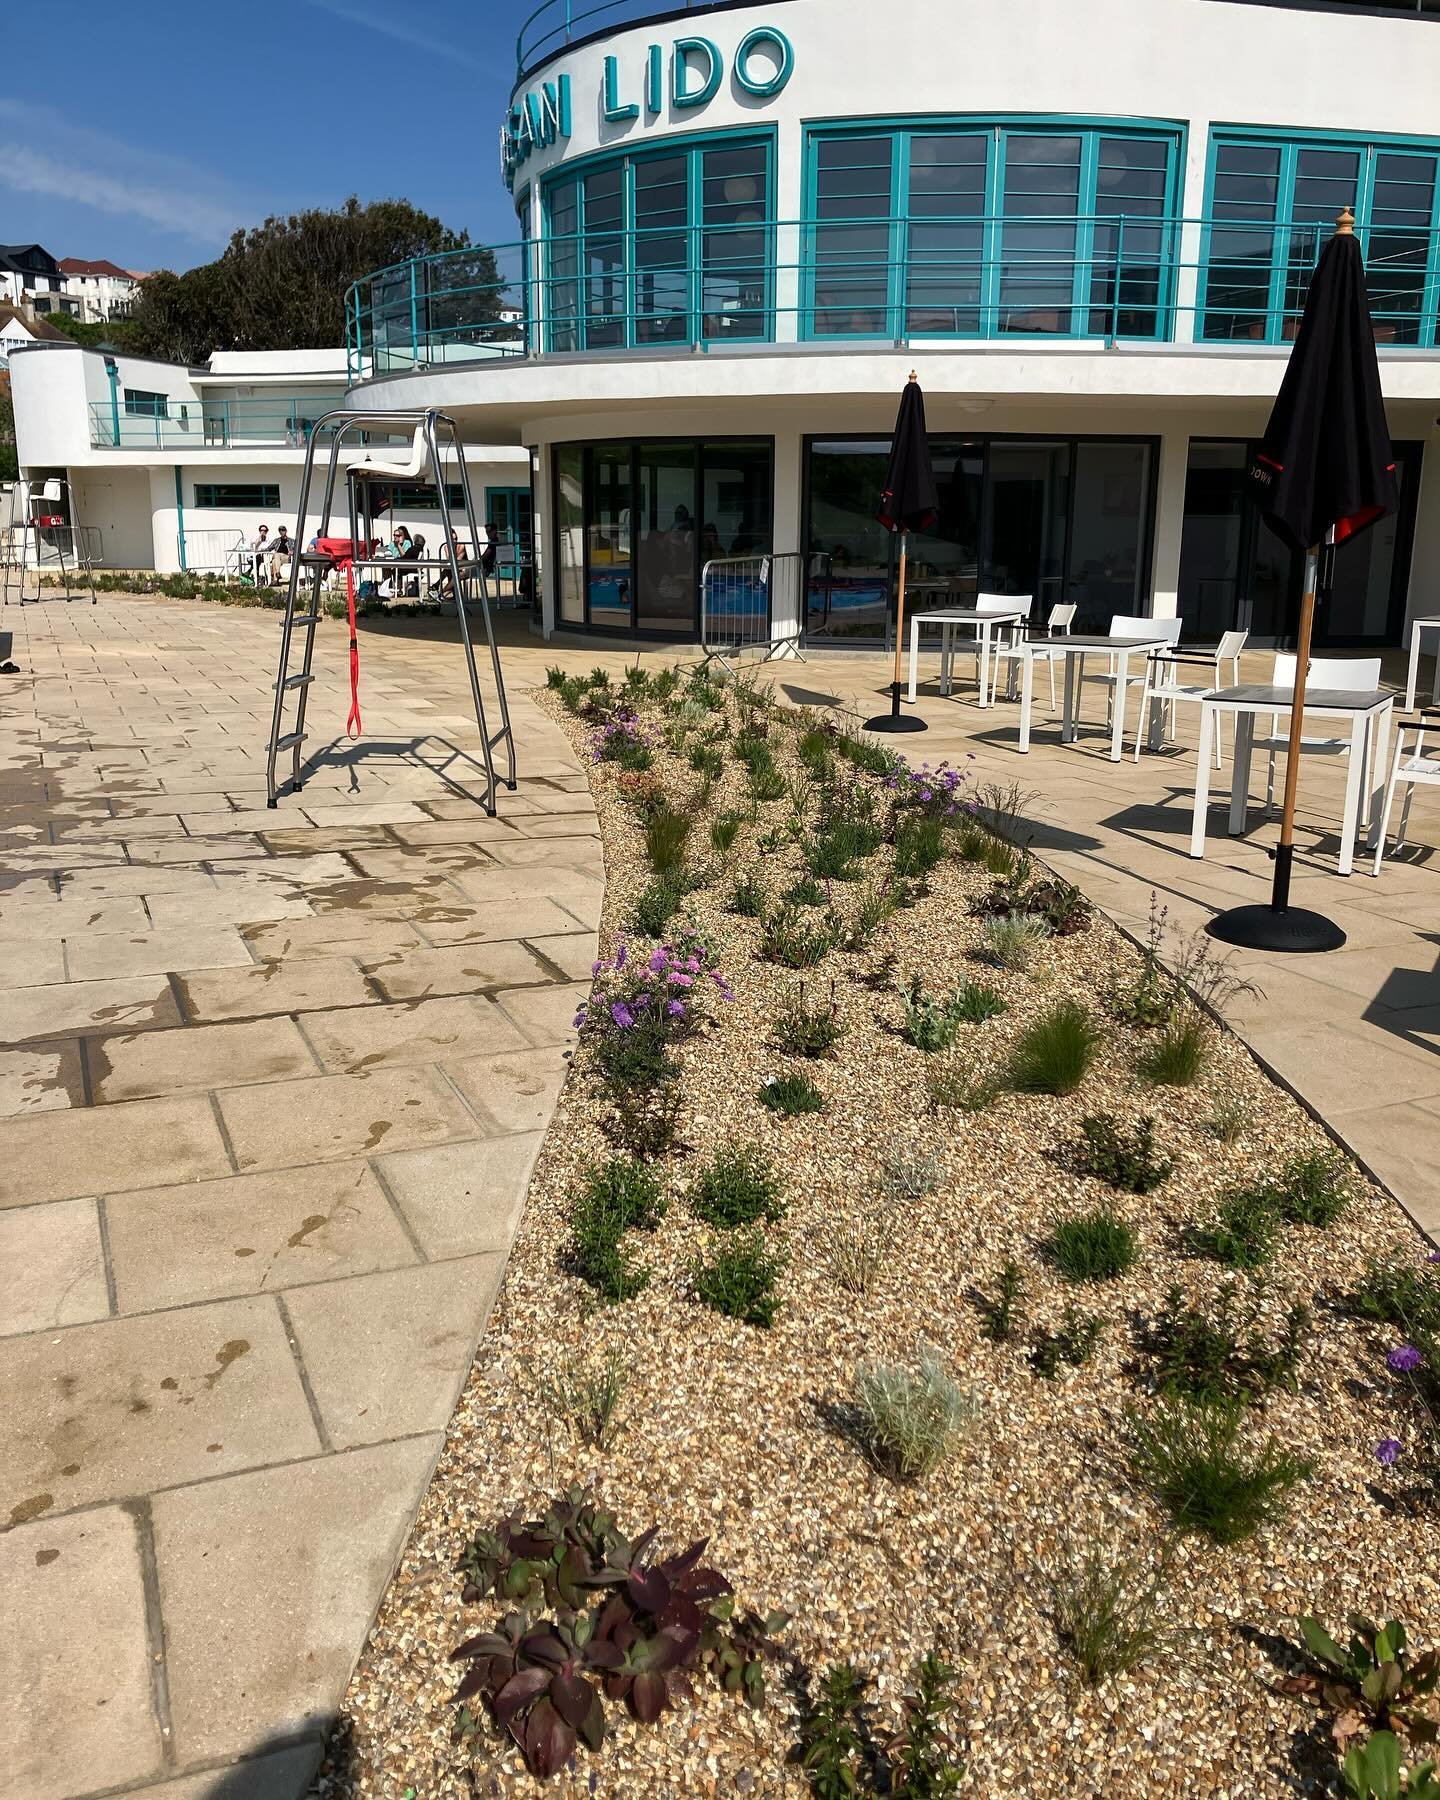 Gorgeous new planting scheme at the Saltdean Lido. This whole place has been saved by the sheer determination and strength of the local community. It is a wonderful hub created through passion. The planting which separates the cafe from the pool area